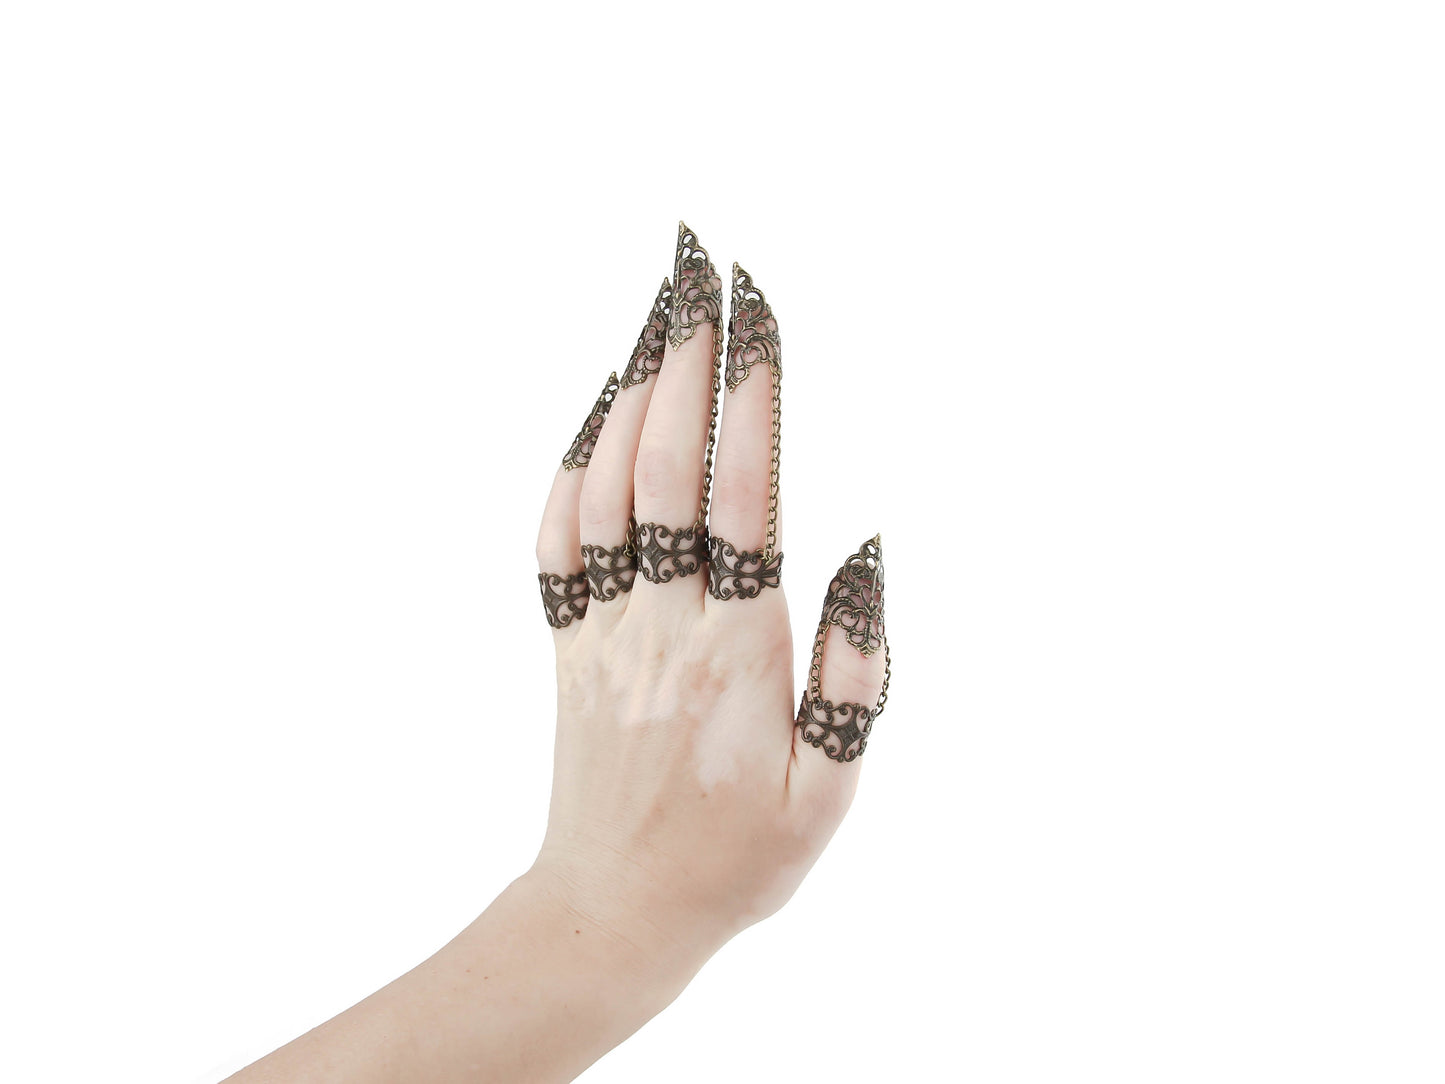 A hand adorned with Myril Jewels' full set of bronze claw rings, showcasing exquisite filigree detailing for a striking dark-avantgarde statement. Each ring, crafted with Neo Gothic intricacy, extends into an elegant point, perfect for Halloween, festival wear, or adding an edge to everyday minimal goth attire. This set aligns with gothic-chic and Witchcore aesthetics, reflecting the brand's commitment to unique, alternative jewelry designs.